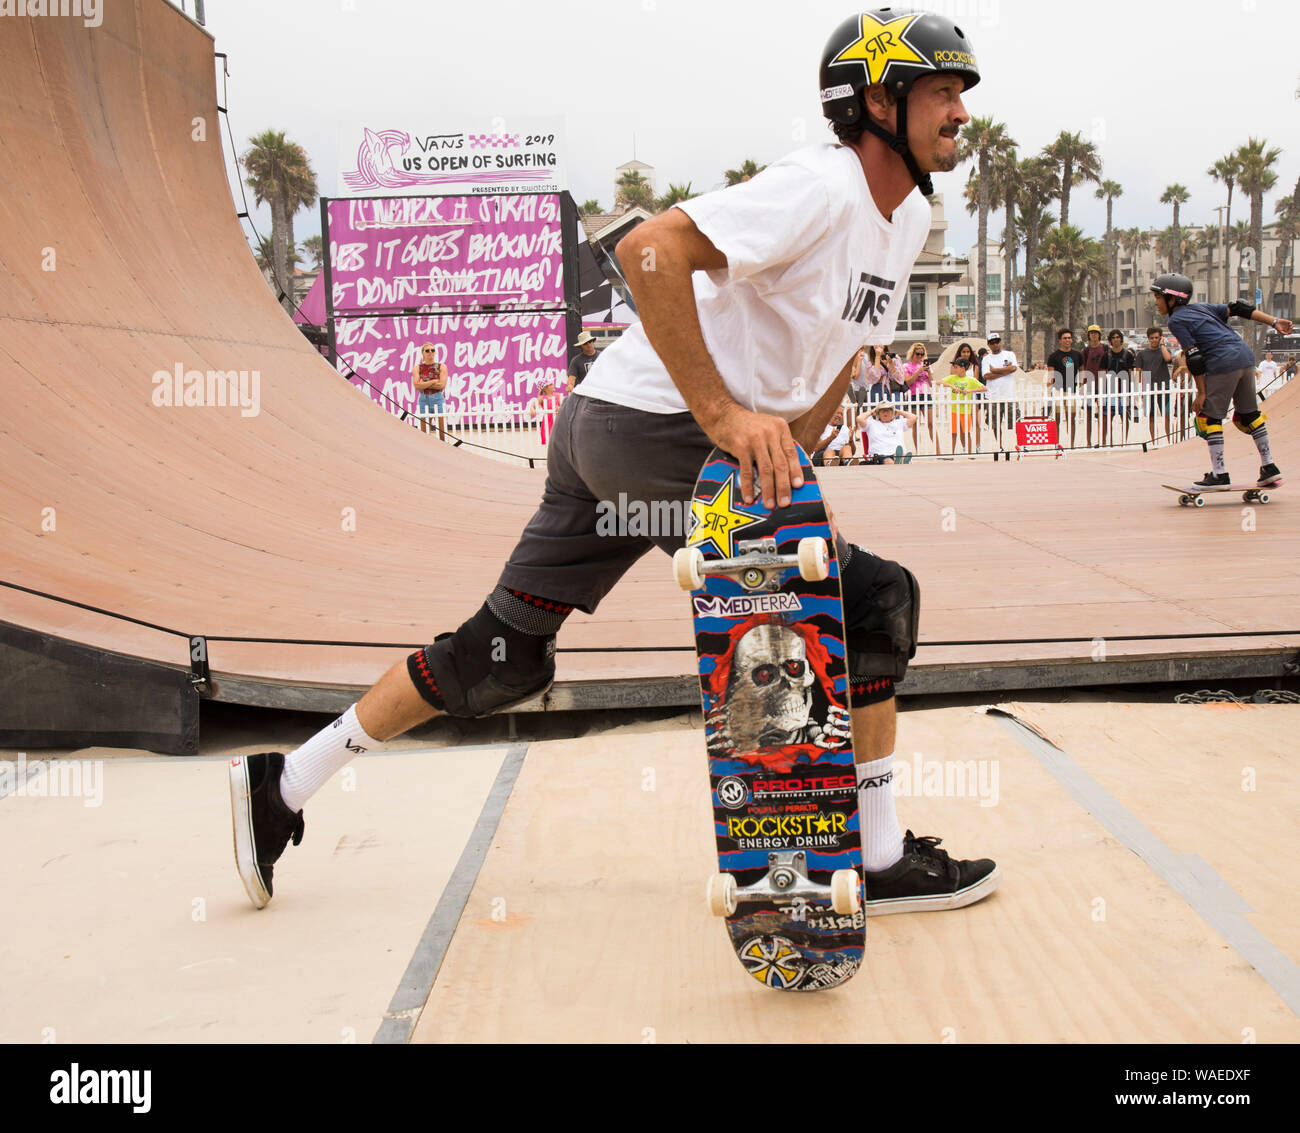 Skateboarder Bucky Lasek warms up. Vans US Open of Surfing, Huntington  Beach, California, United States of America Stock Photo - Alamy